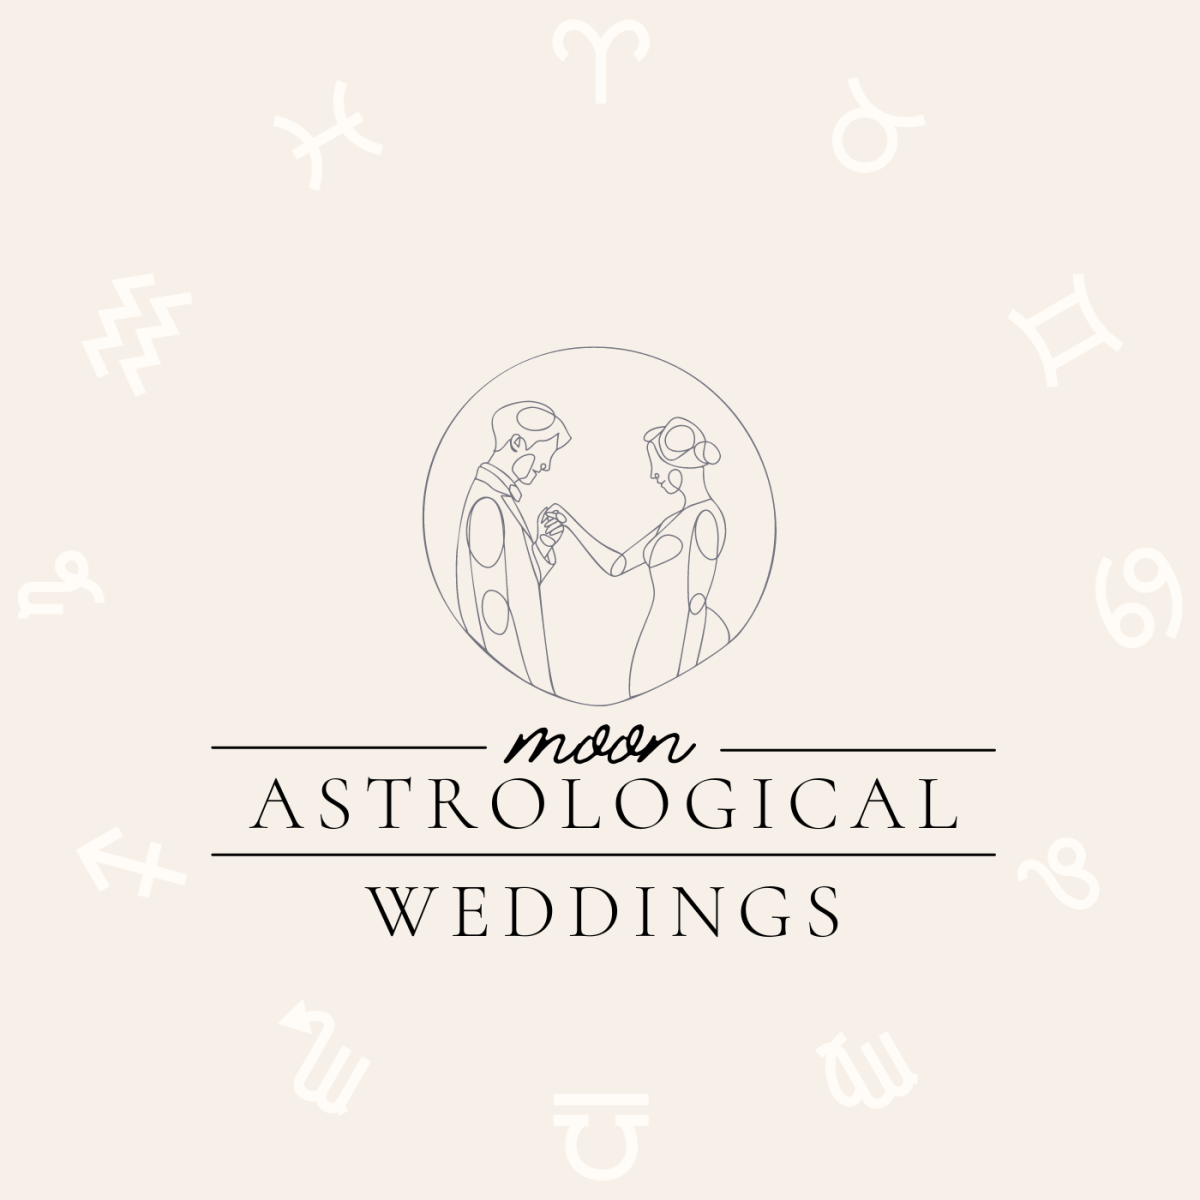 Weddings Planned by the Moon's Astrological Position